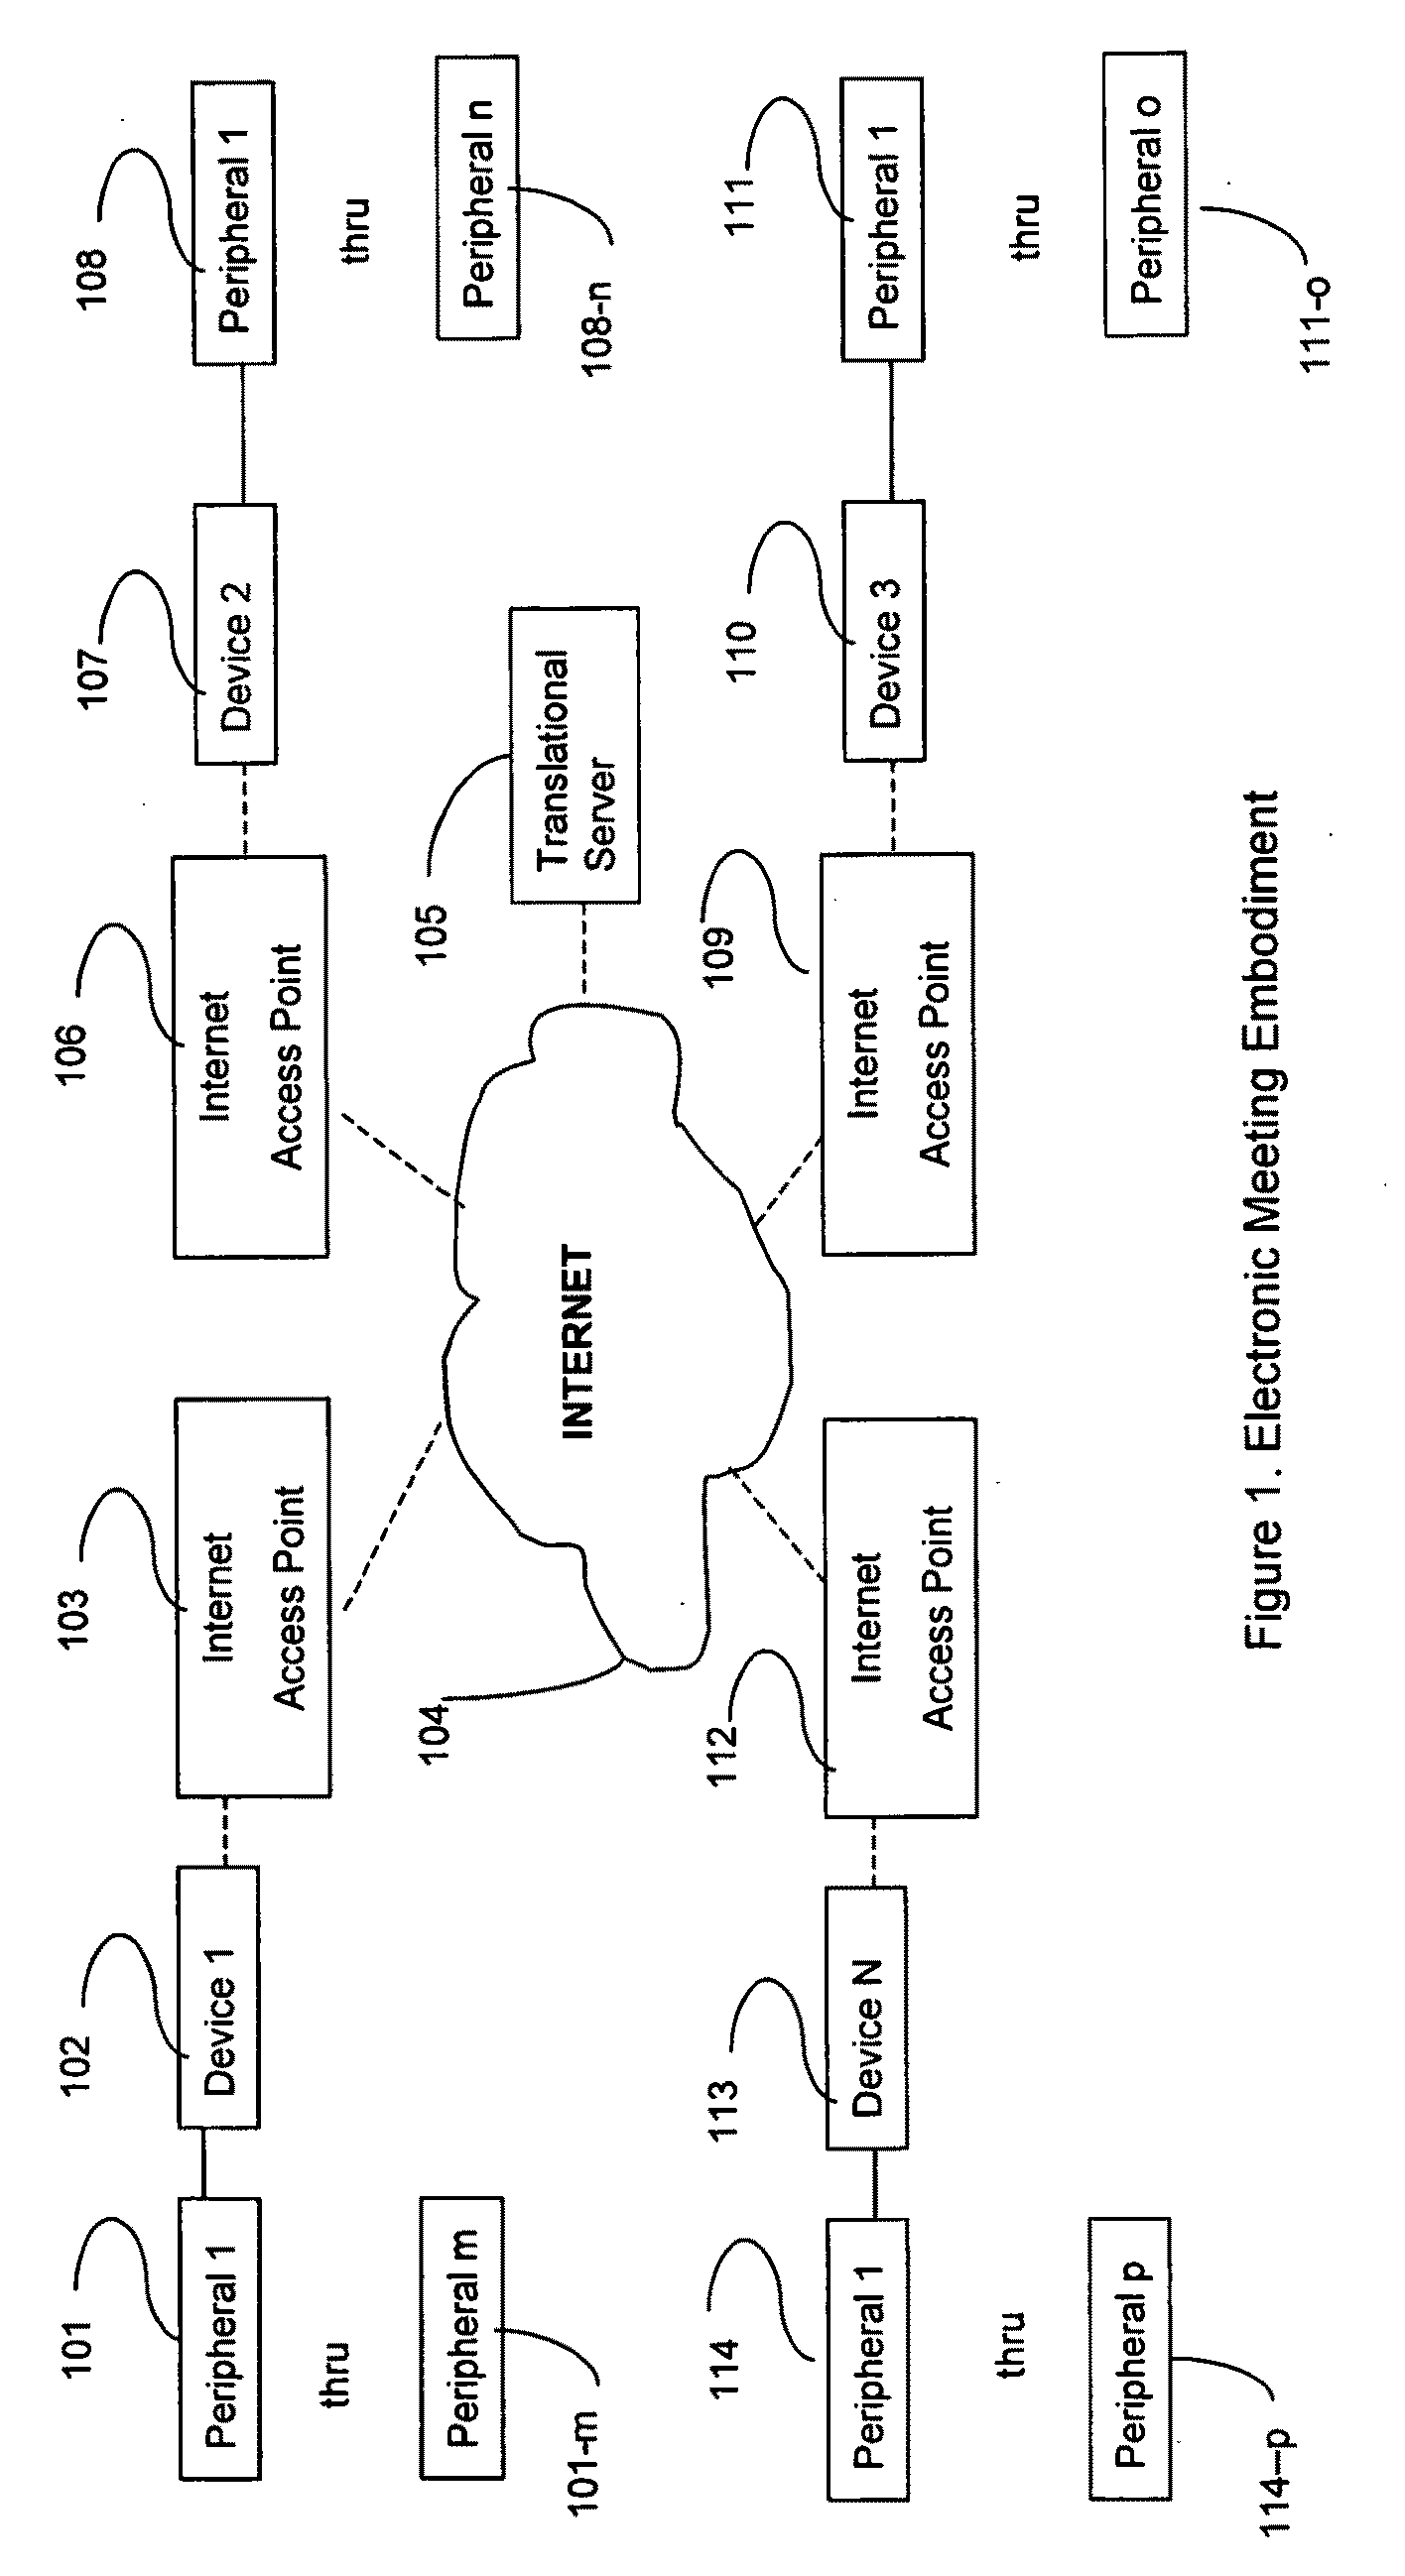 Enhanced interactive electronic meeting system